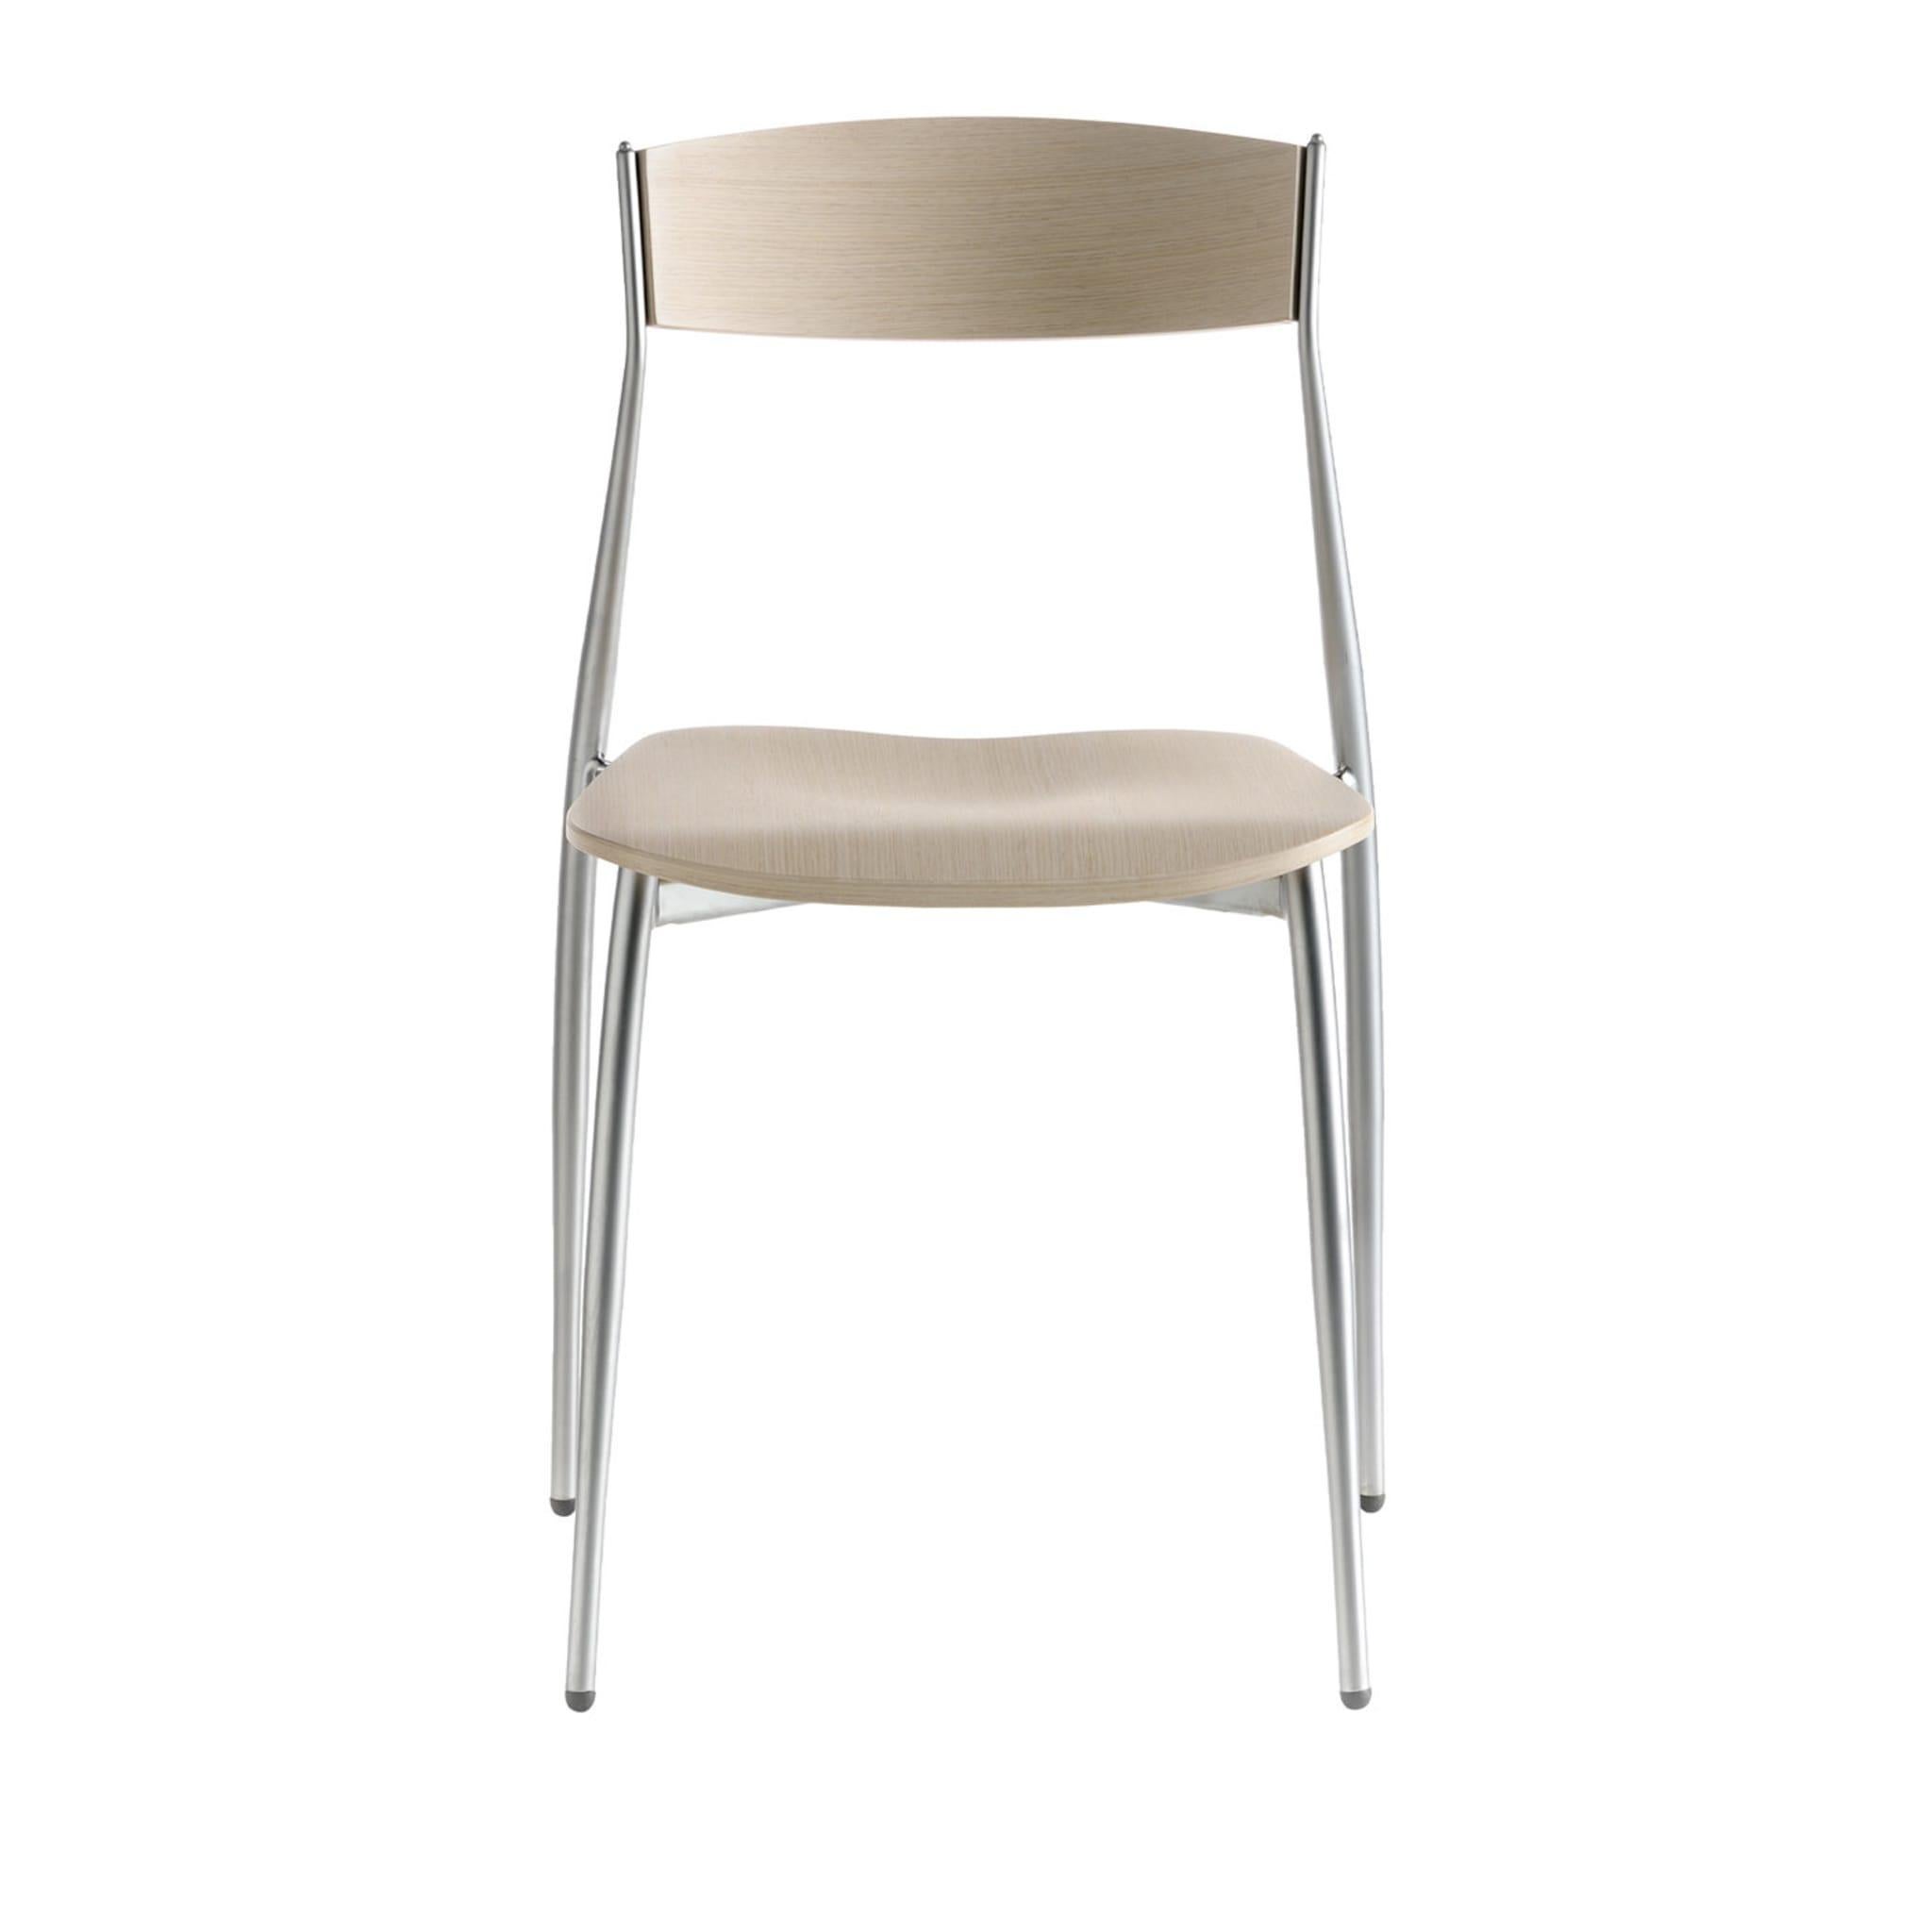 Durable, practical yet highly elegant, the Baba Chair Collection is the perfect choice for both commercial and residential interiors. This iconic, copyrighted 1992 design by Sergio Mian features a slender chromed cylindrical steel frame (diameter 22